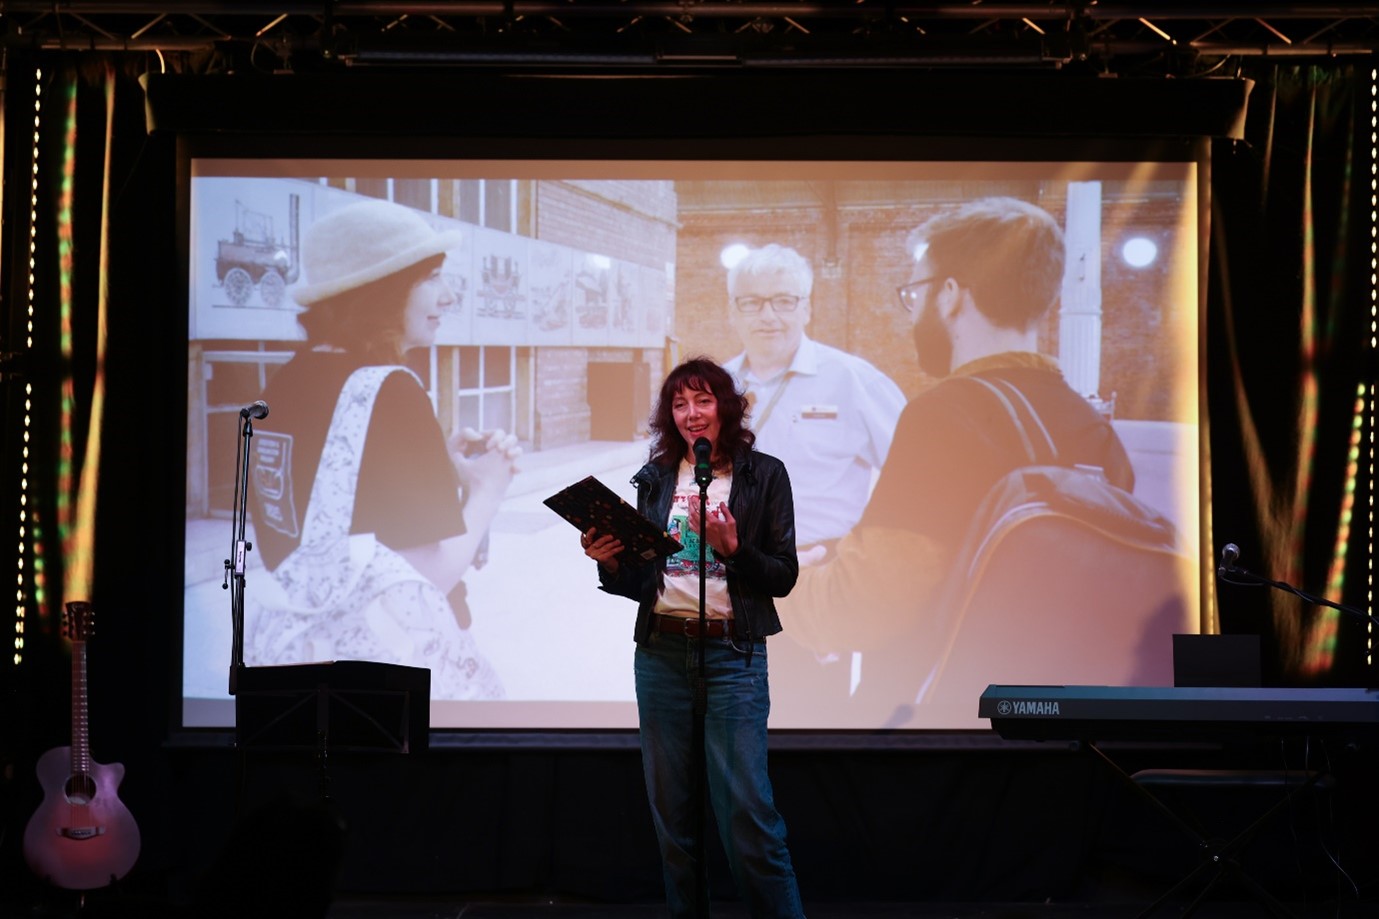 performer on stage with book in hand, screen behingd showing a picture of three figures as Darlington station